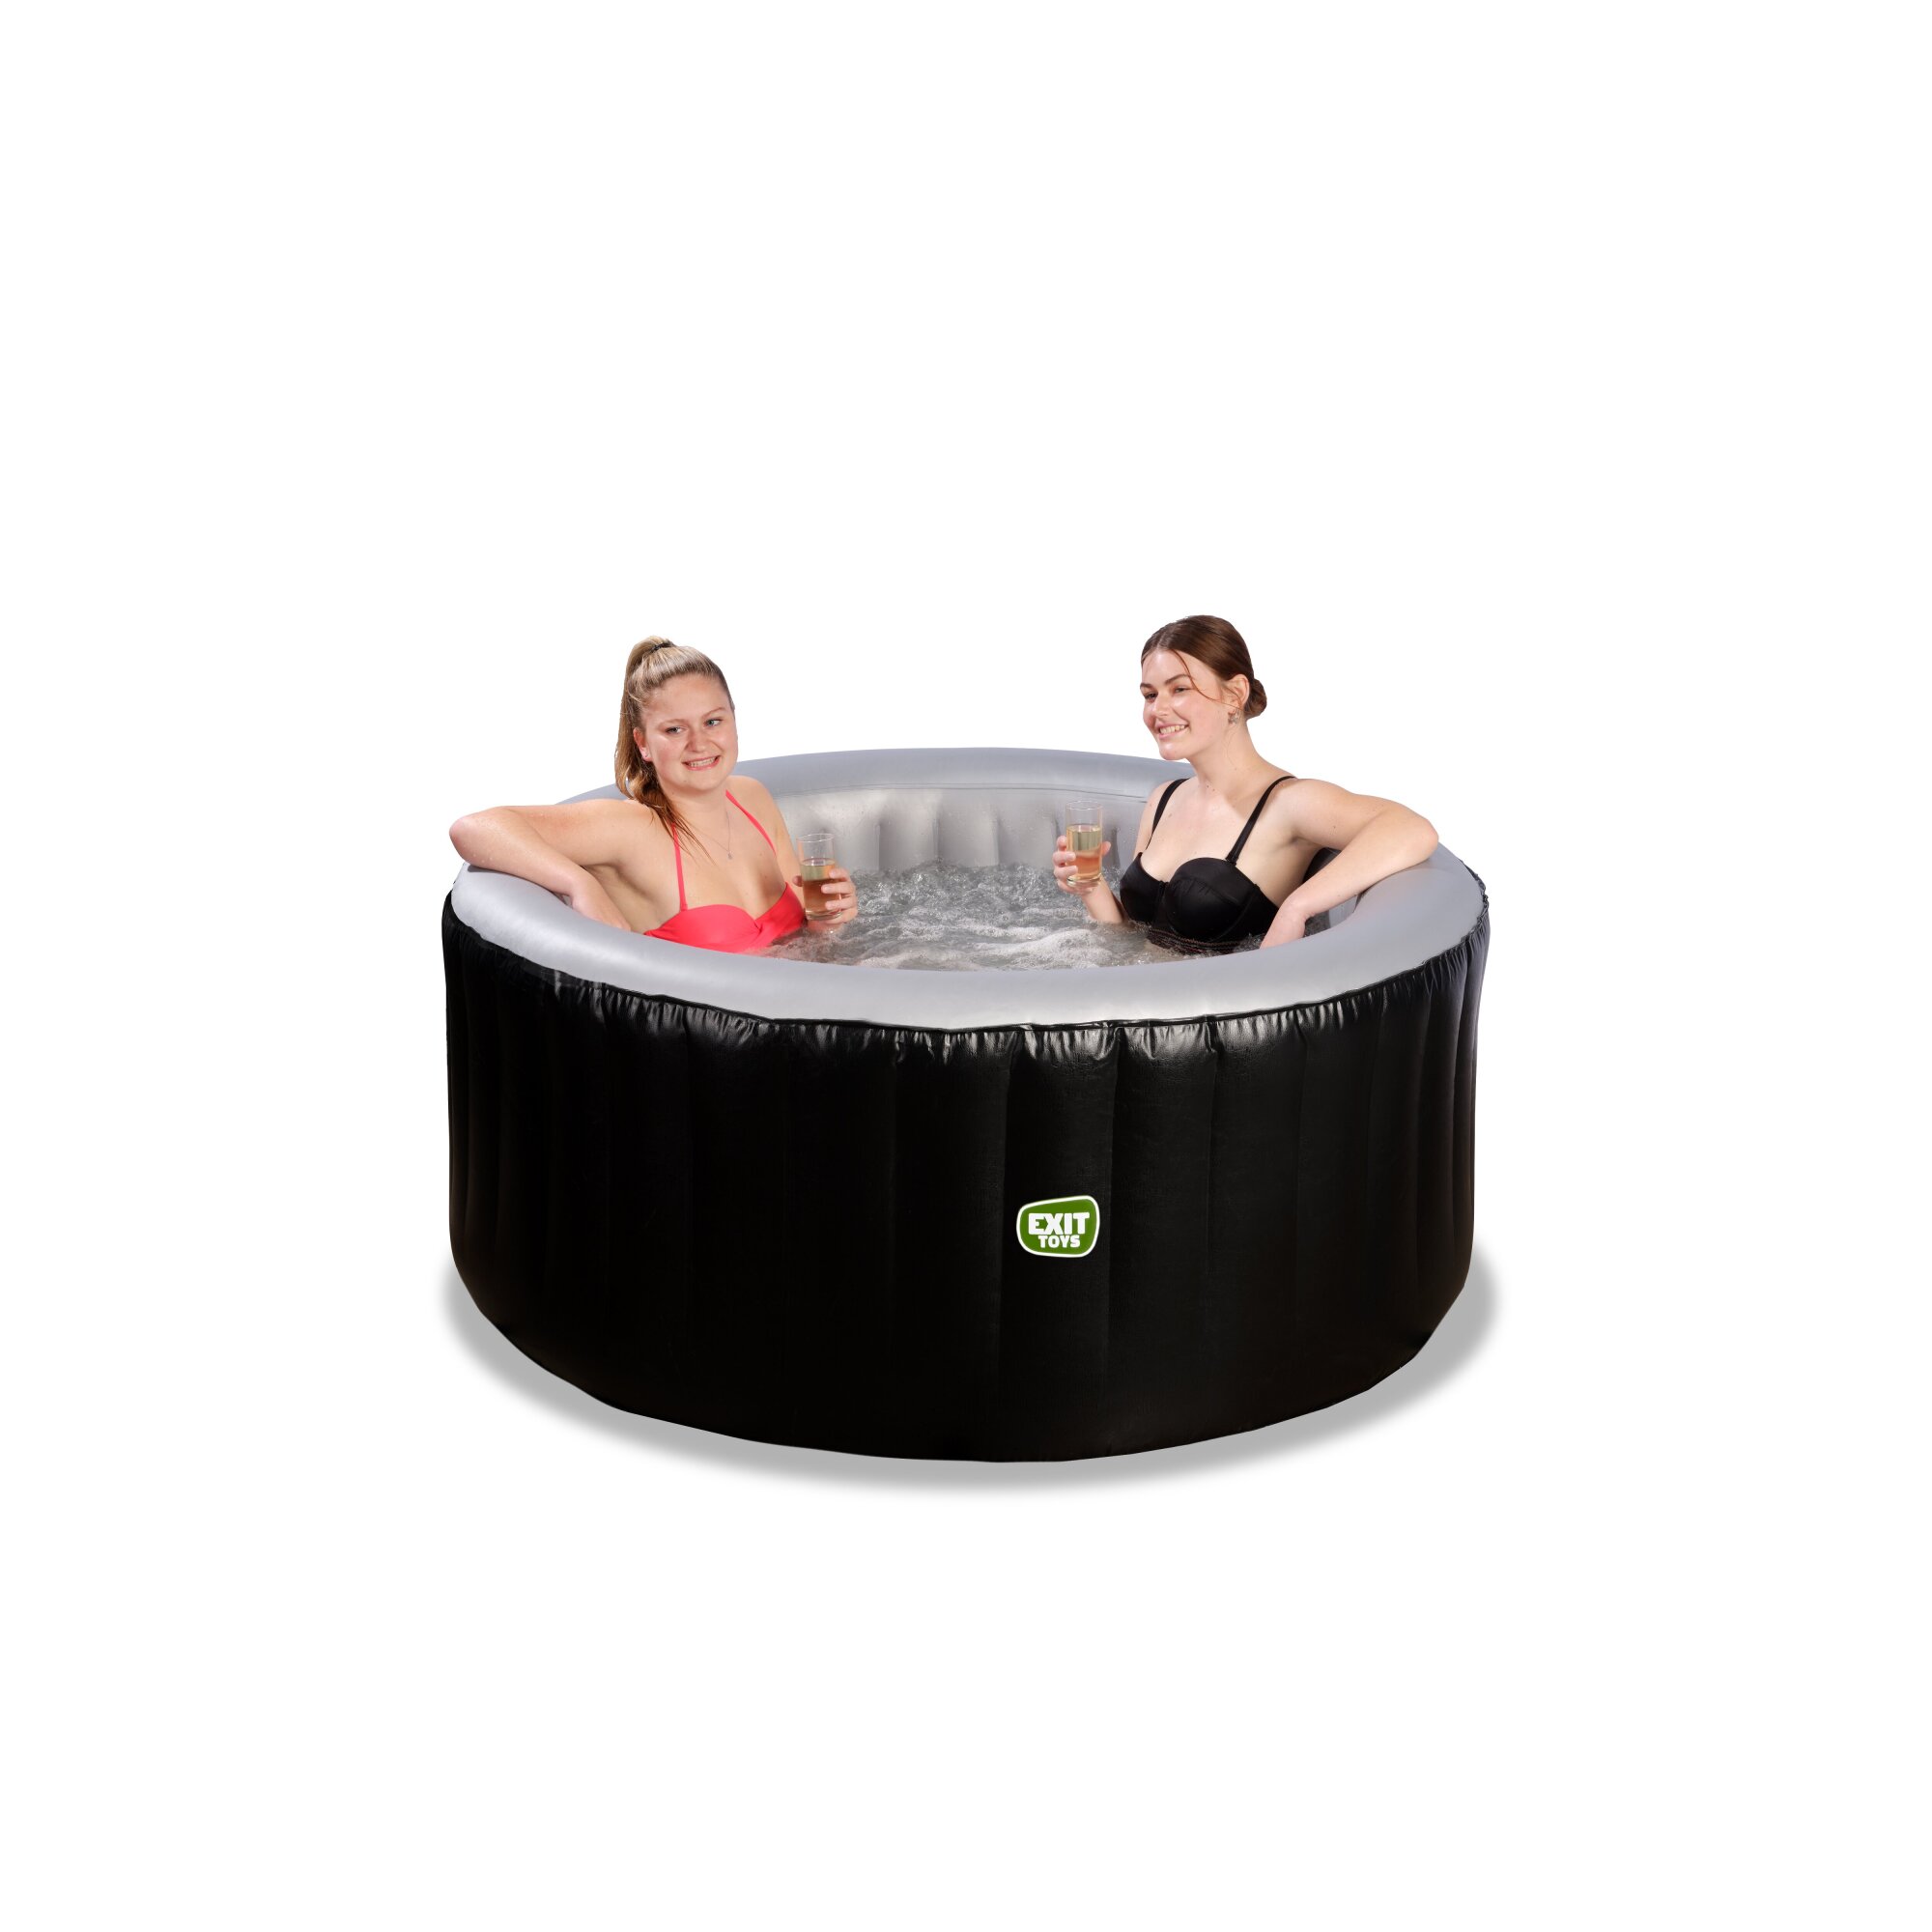 EXIT Silver Classic spa (2 persons) - black